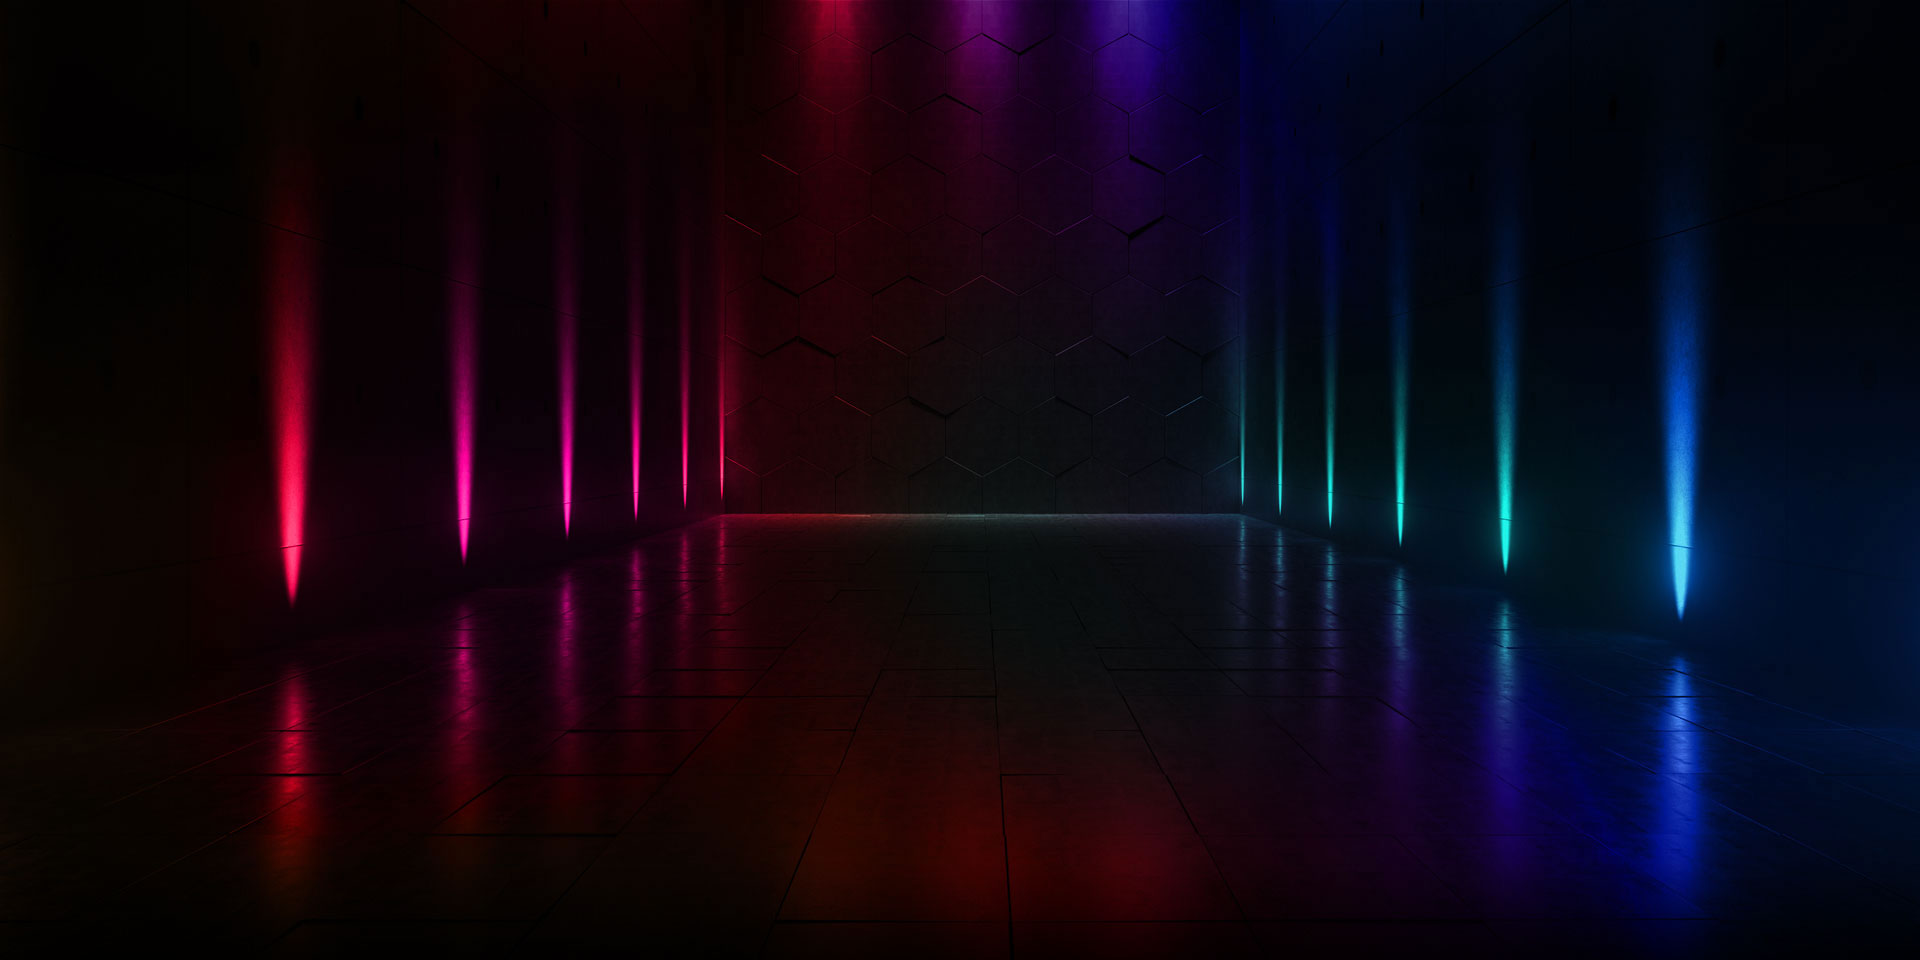 Wallpaper Rgb / Rgb Wallpaper Engine PC Gaming Wallpaper. all of my created rgb wallpaper here